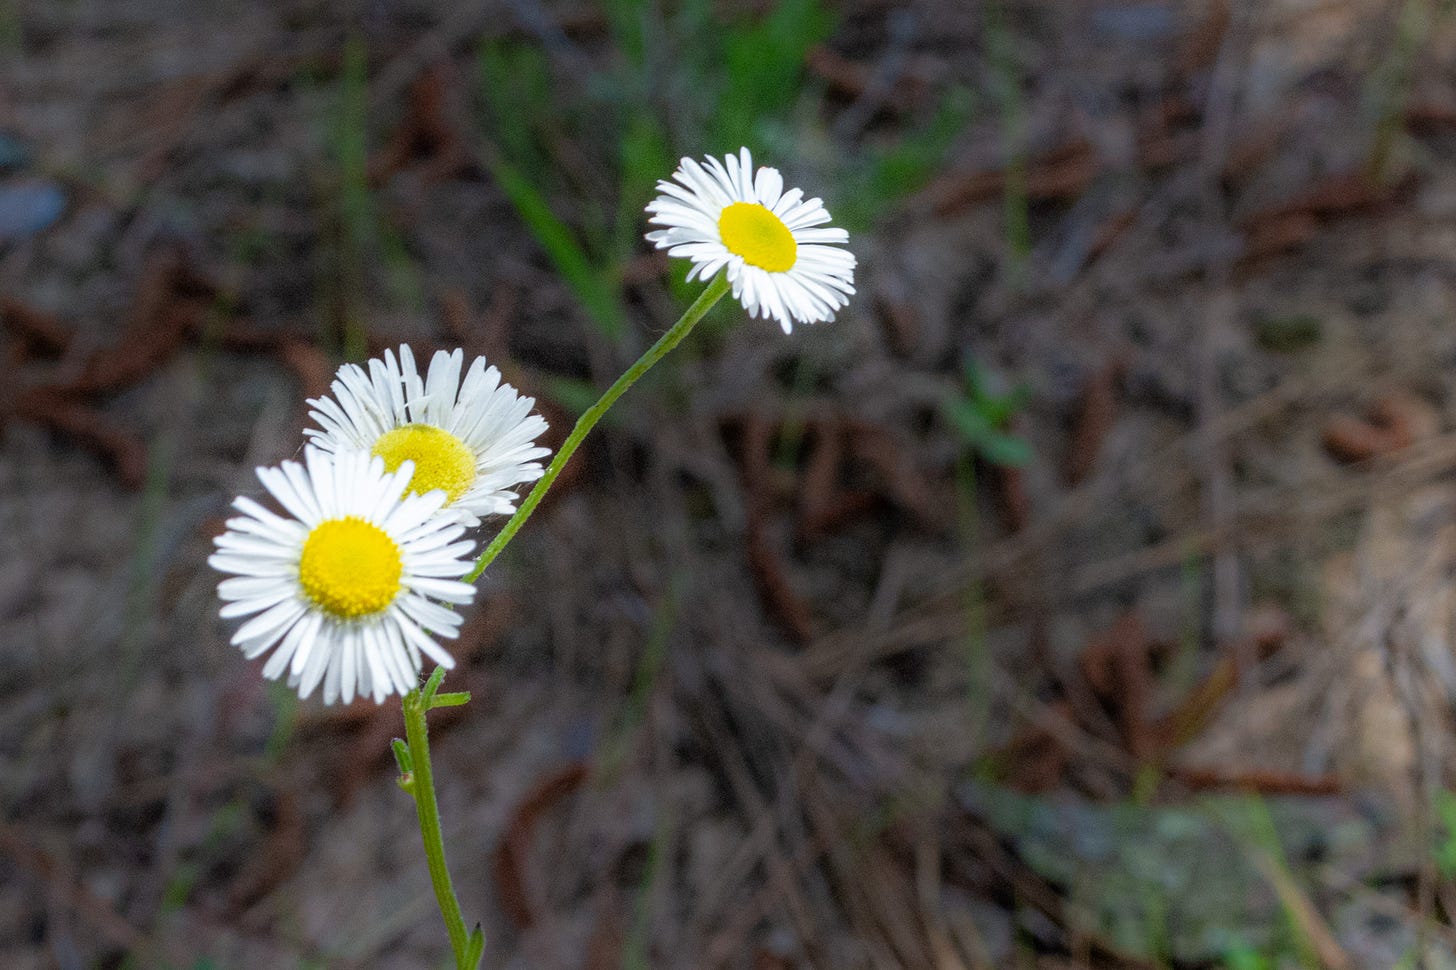 three small wild white daisies with yellow centers with the blurred ground in the background